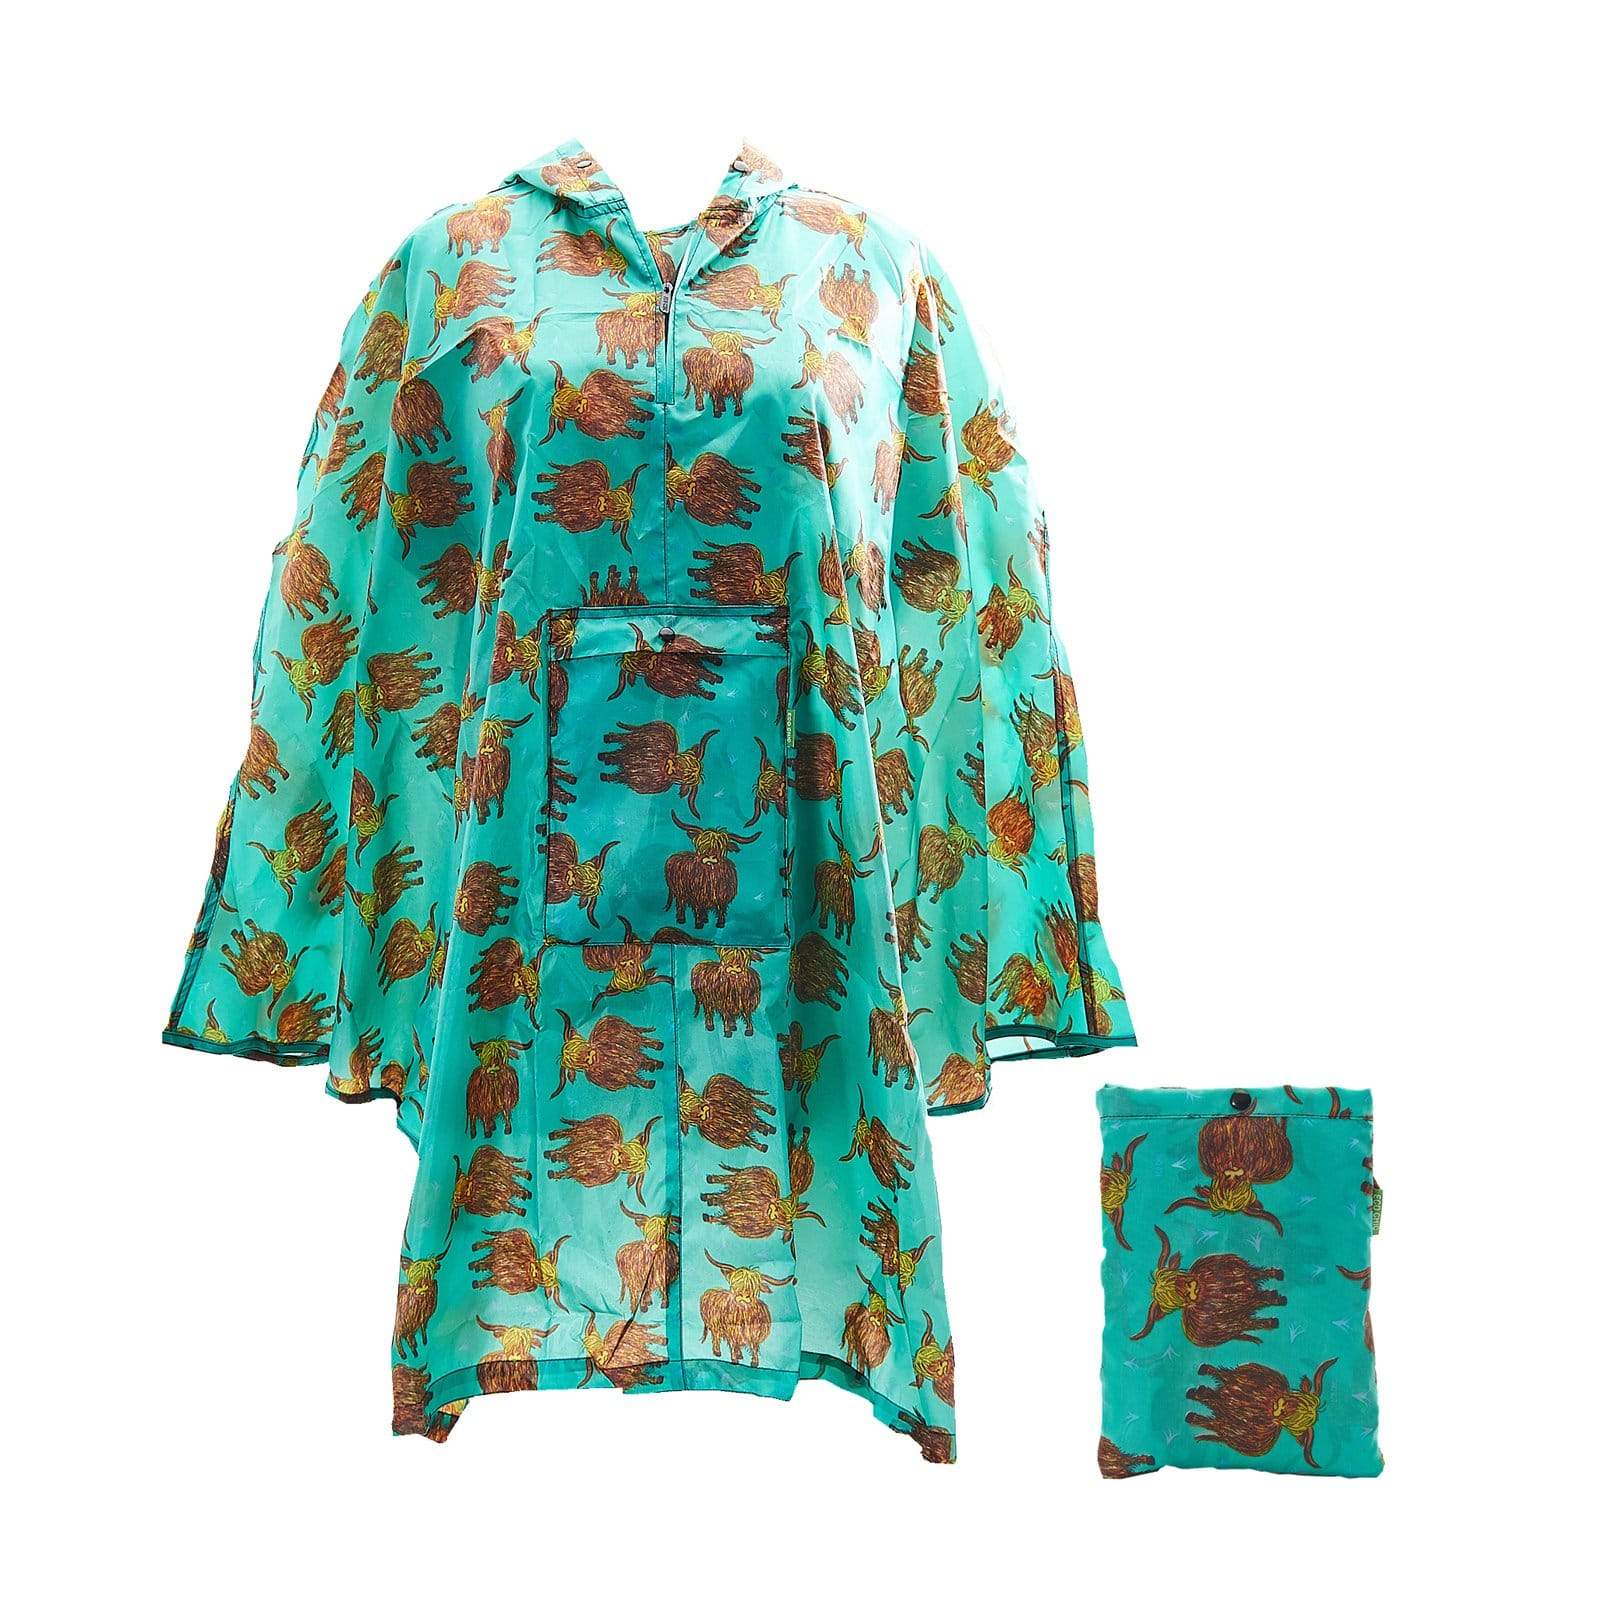 Eco Chic Teal Highland Cow Waterproof Foldable Adult Poncho